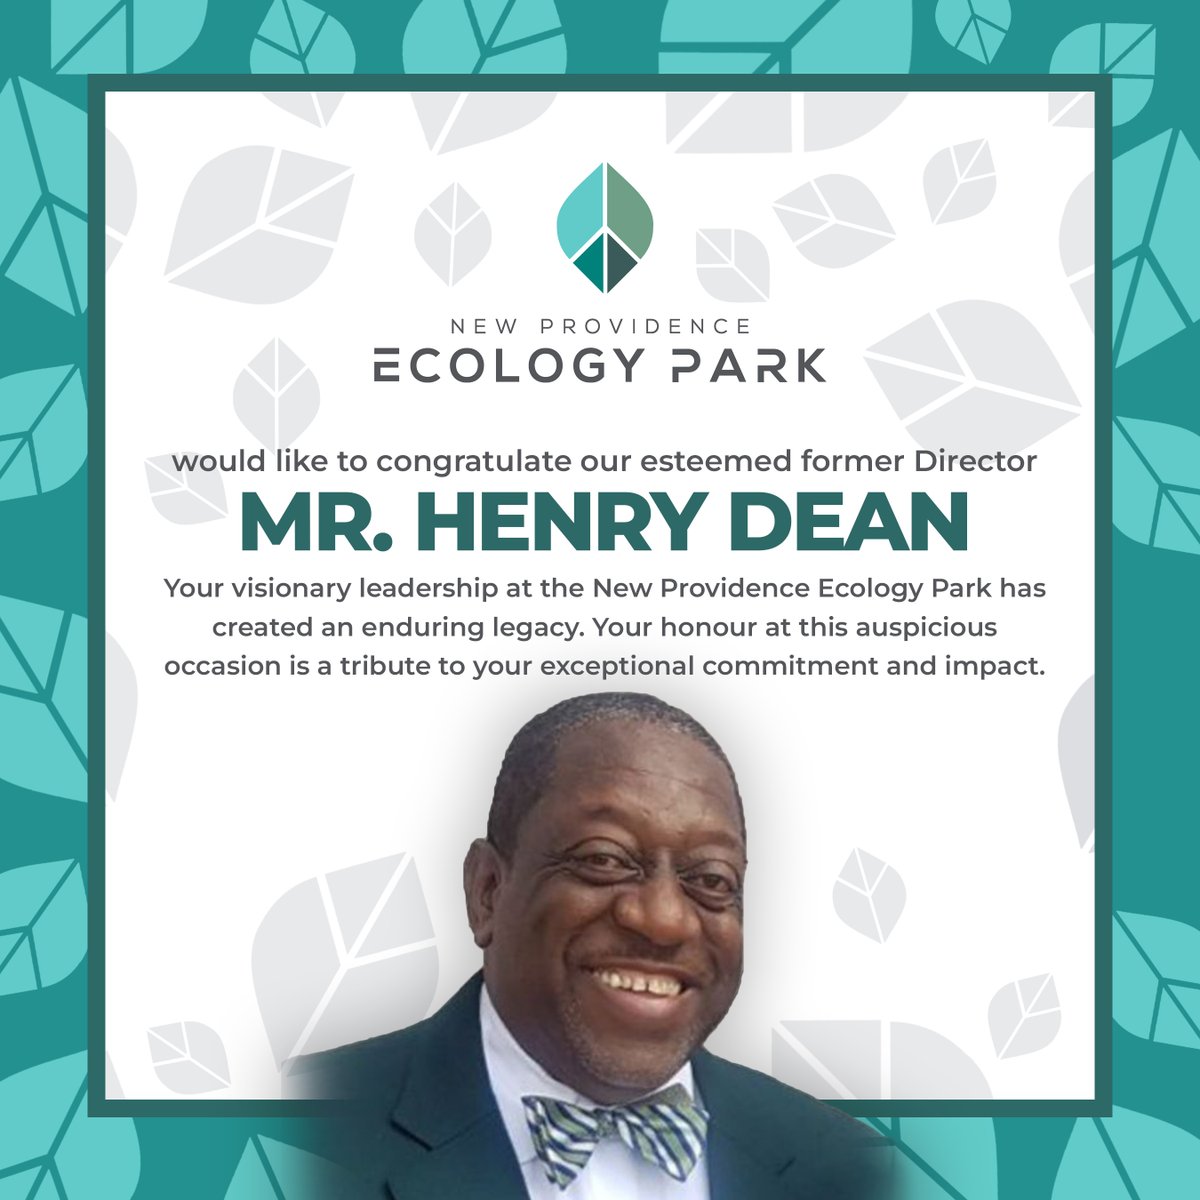 Congratulations to Mr. Henry Dean, former NPEP Director, on winning the Lady Sassoon Golden Heart Award for his exceptional community contributions. #SustainabilityChampion #NewProvidenceEcologyPark. #SustainabilityChampion  #NewProvidenceEcologyPark